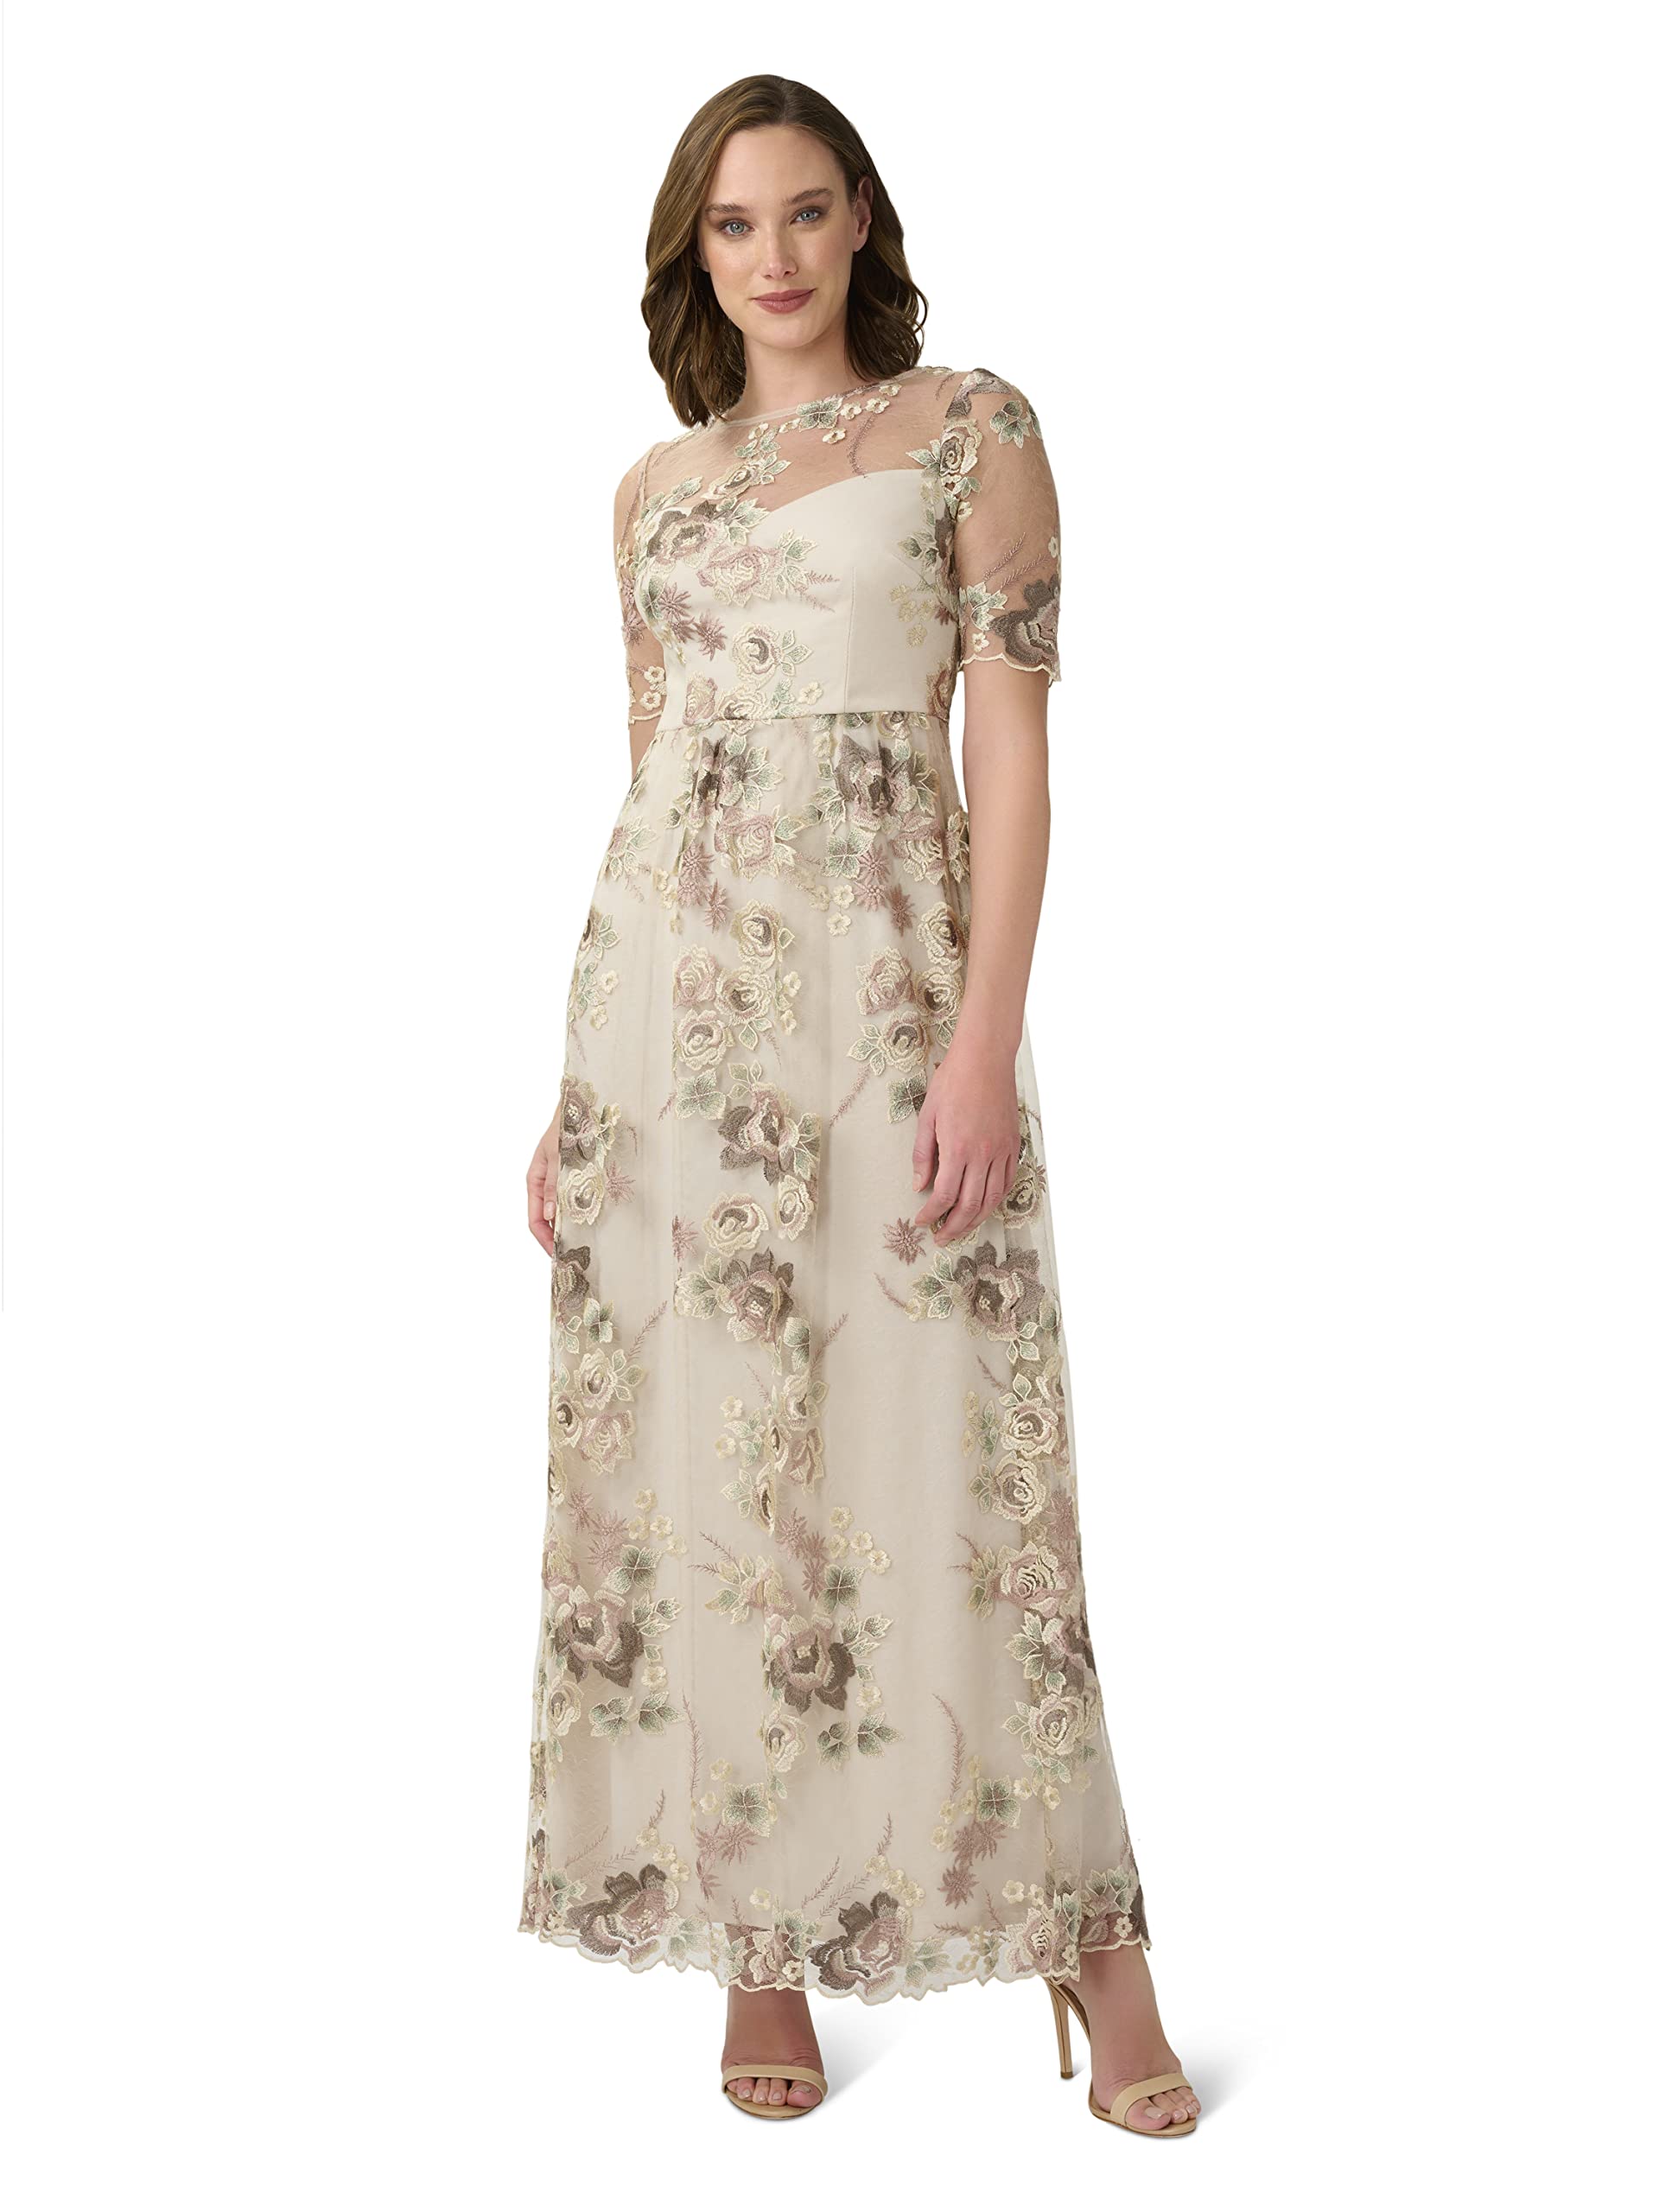 Adrianna Papell Women's Long Embroidered Dress